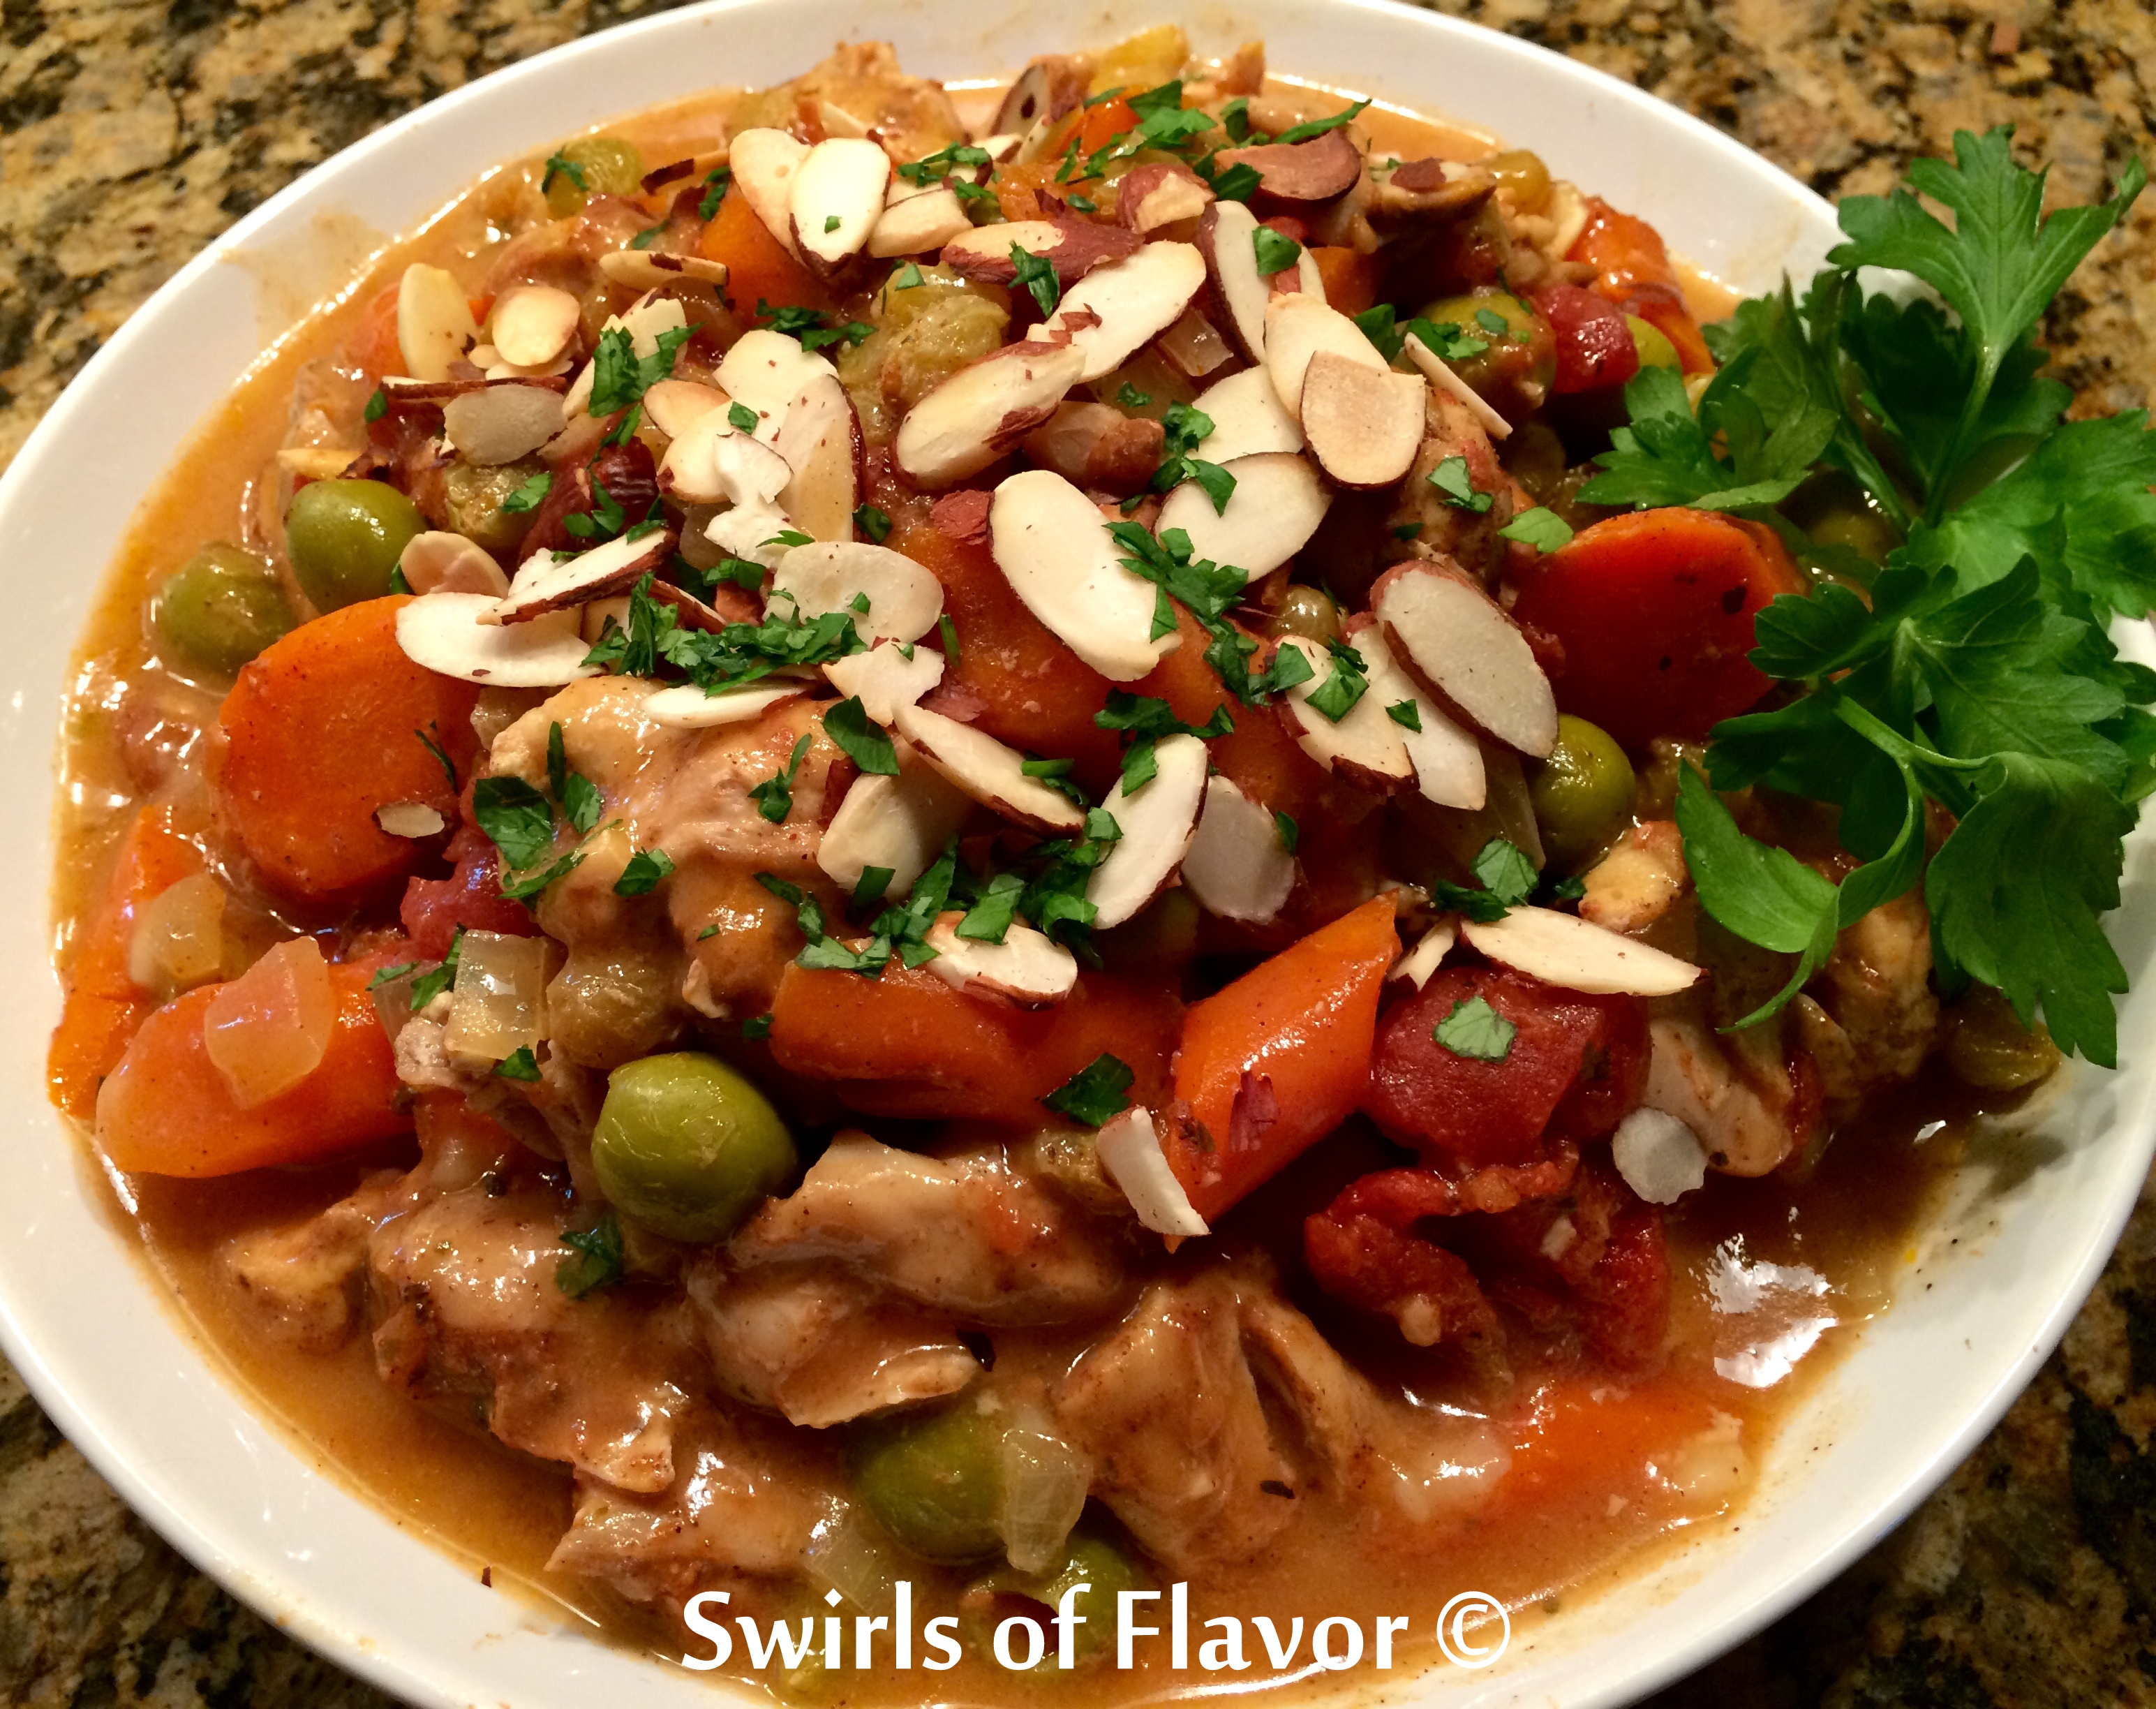 The warm spices of cinnamon and cumin combine with chicken, almonds, raisins and tomatoes for our Slow Cooker Moroccan Chicken recipe. Let your slow cooker do the work on these busy back to school days! #slowcooker #easyrecipe #moroccan #cinnamon #raisins #olives #chicken #chickenthighs #sqwirlsofflavor